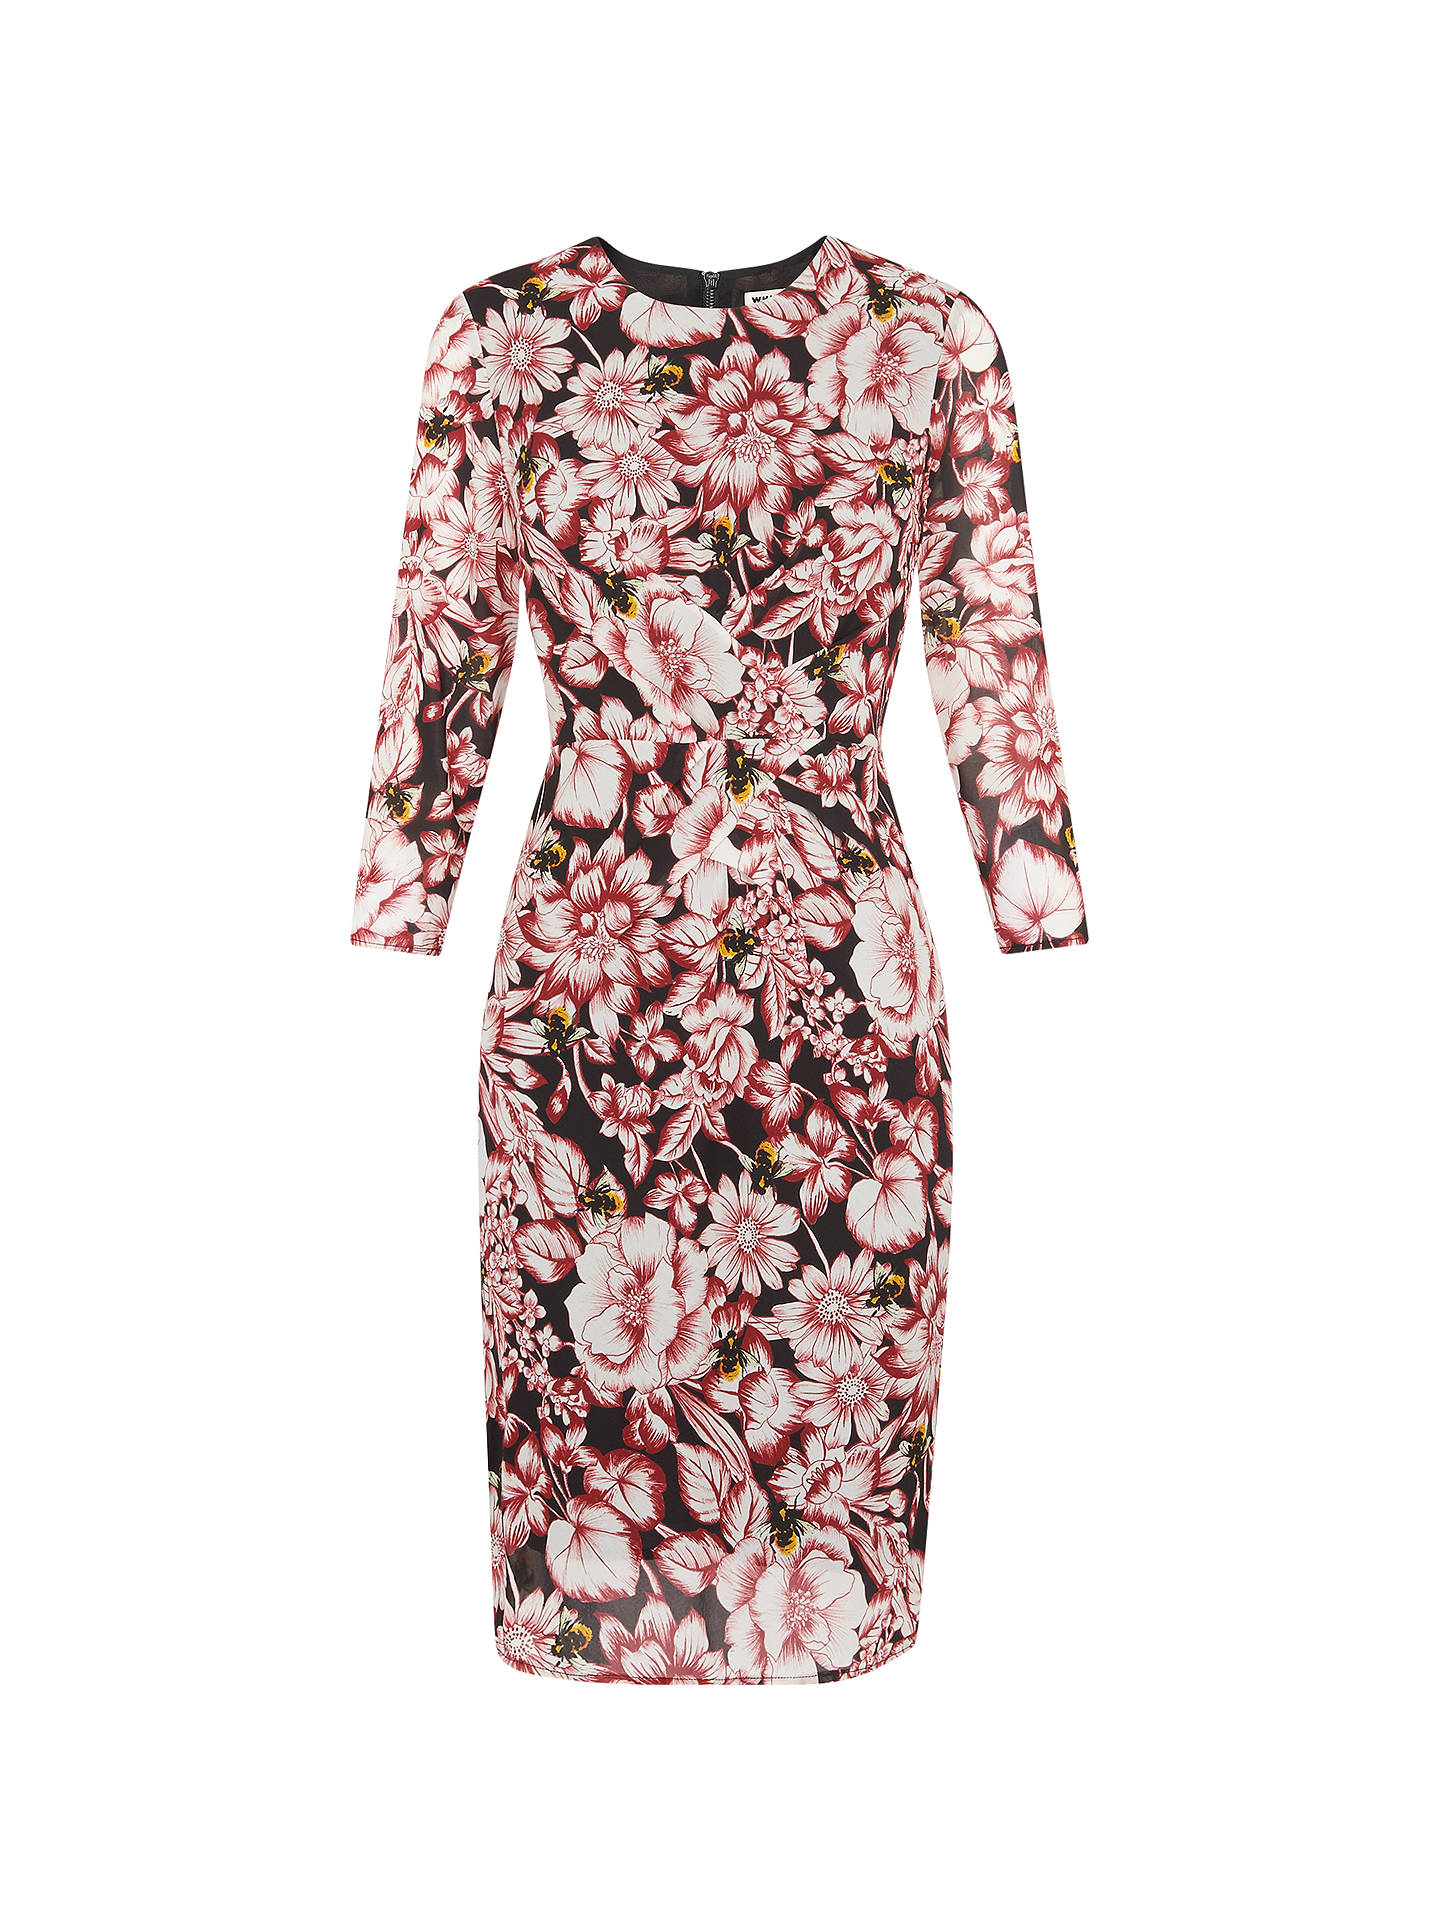 Whistles Floral Bee Print Bodycon Dress, Multi at John Lewis & Partners